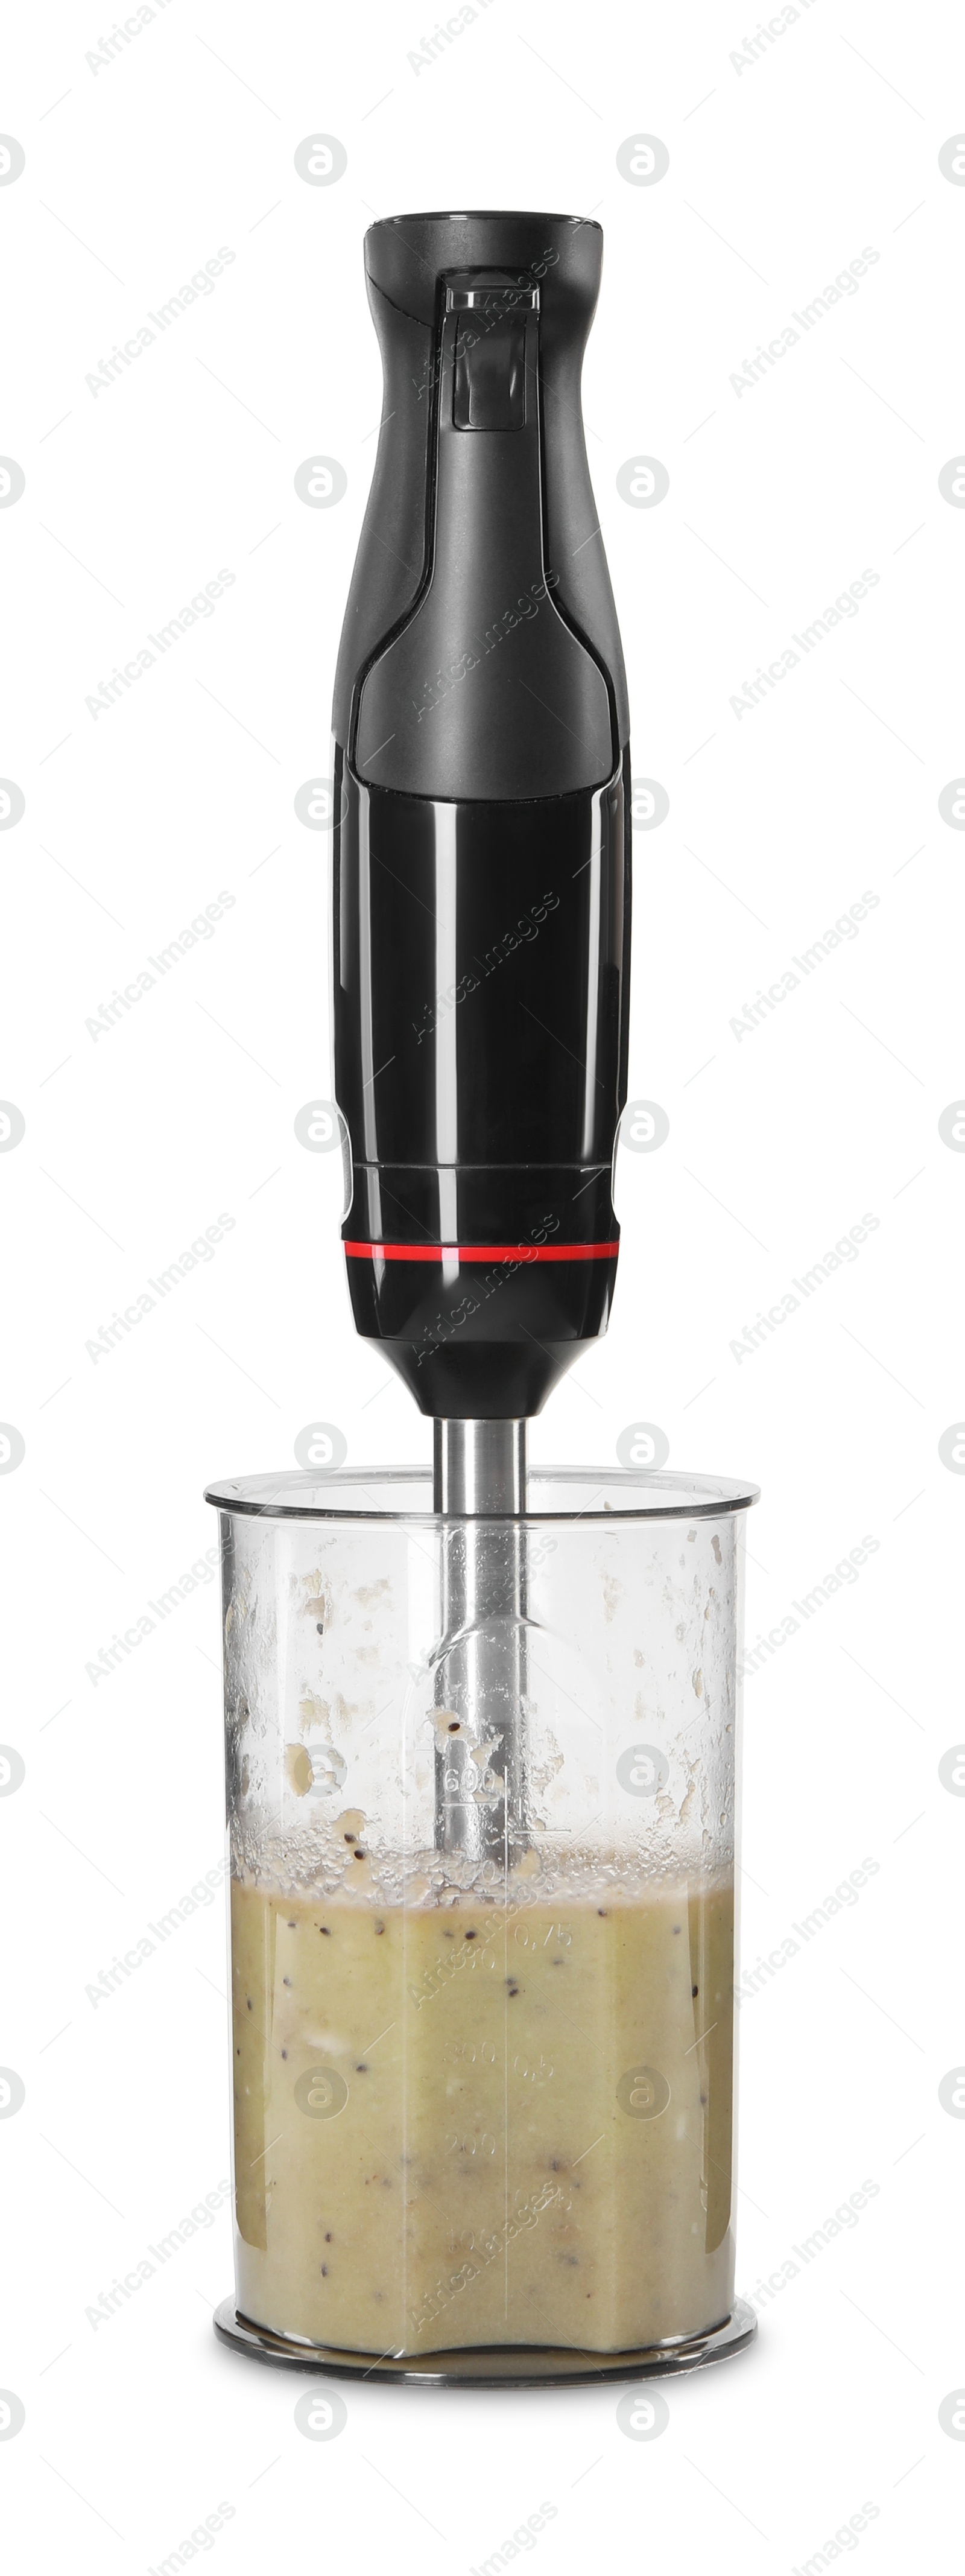 Photo of Hand blender with mixture of ingredients isolated on white